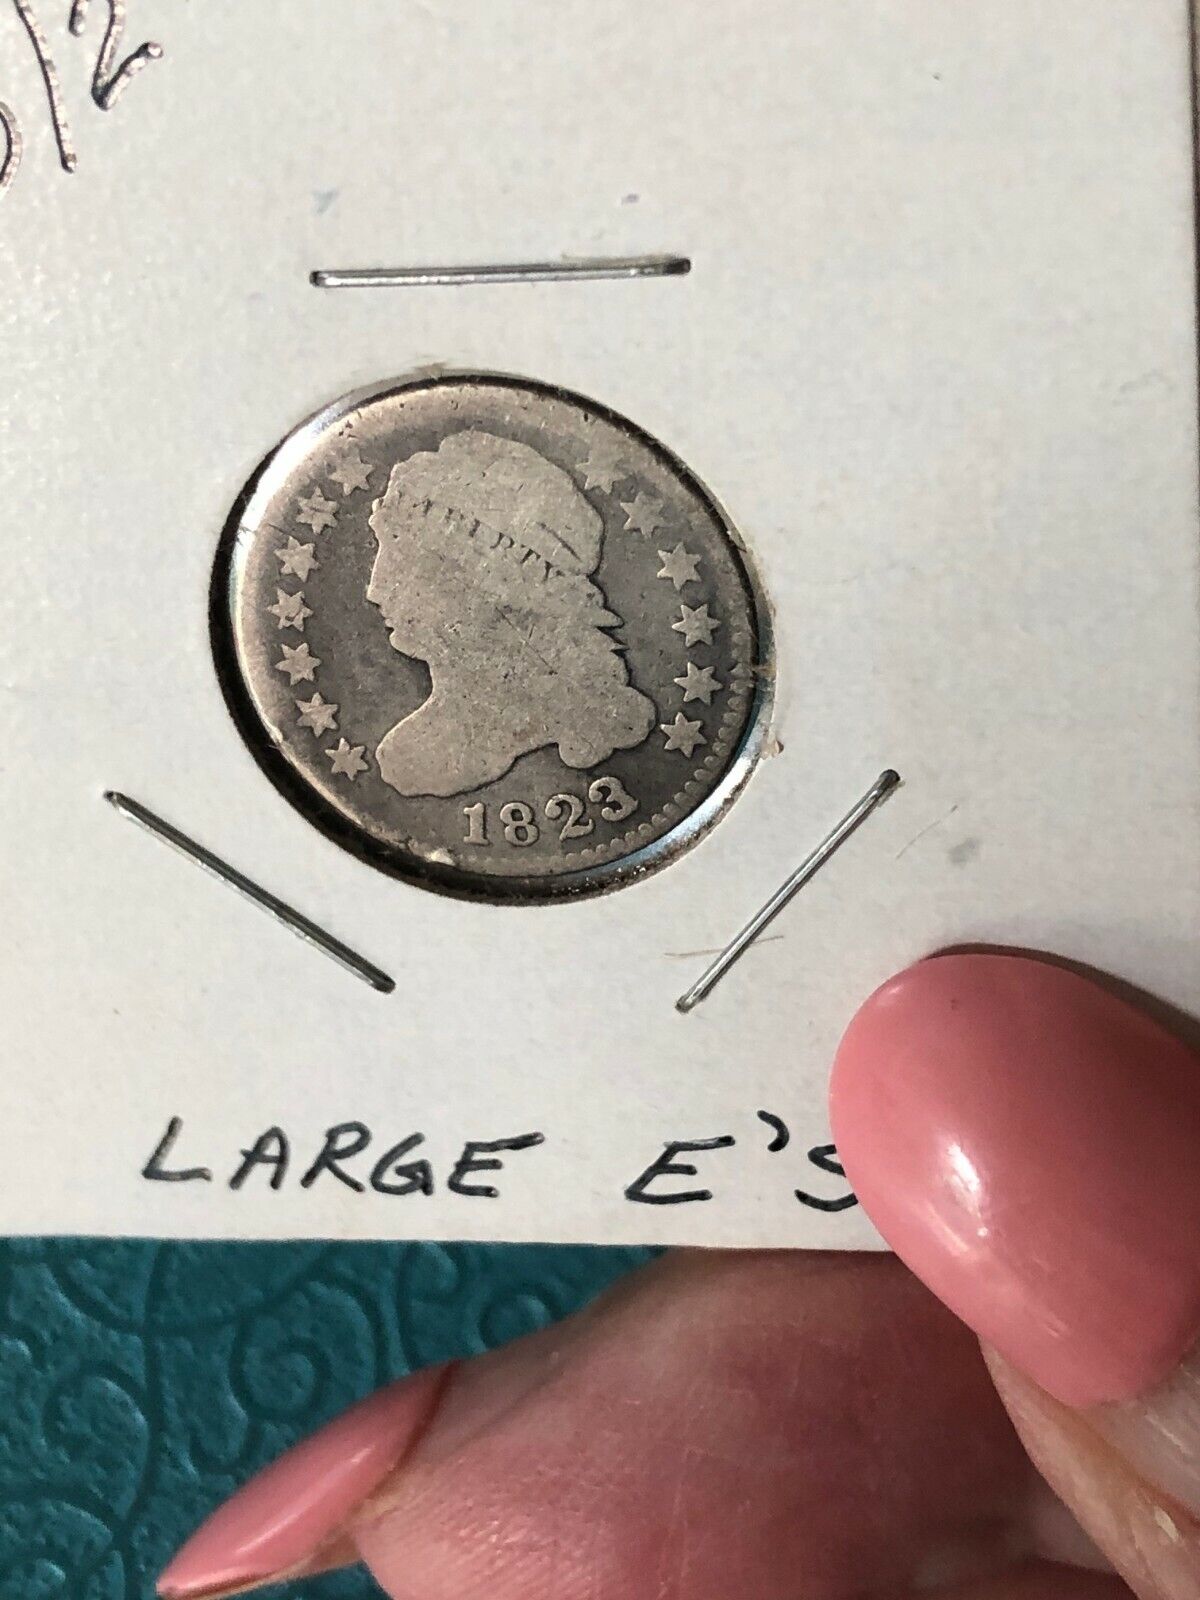 1823 Over 2 Capped Bust Dime, Large E's, Nice